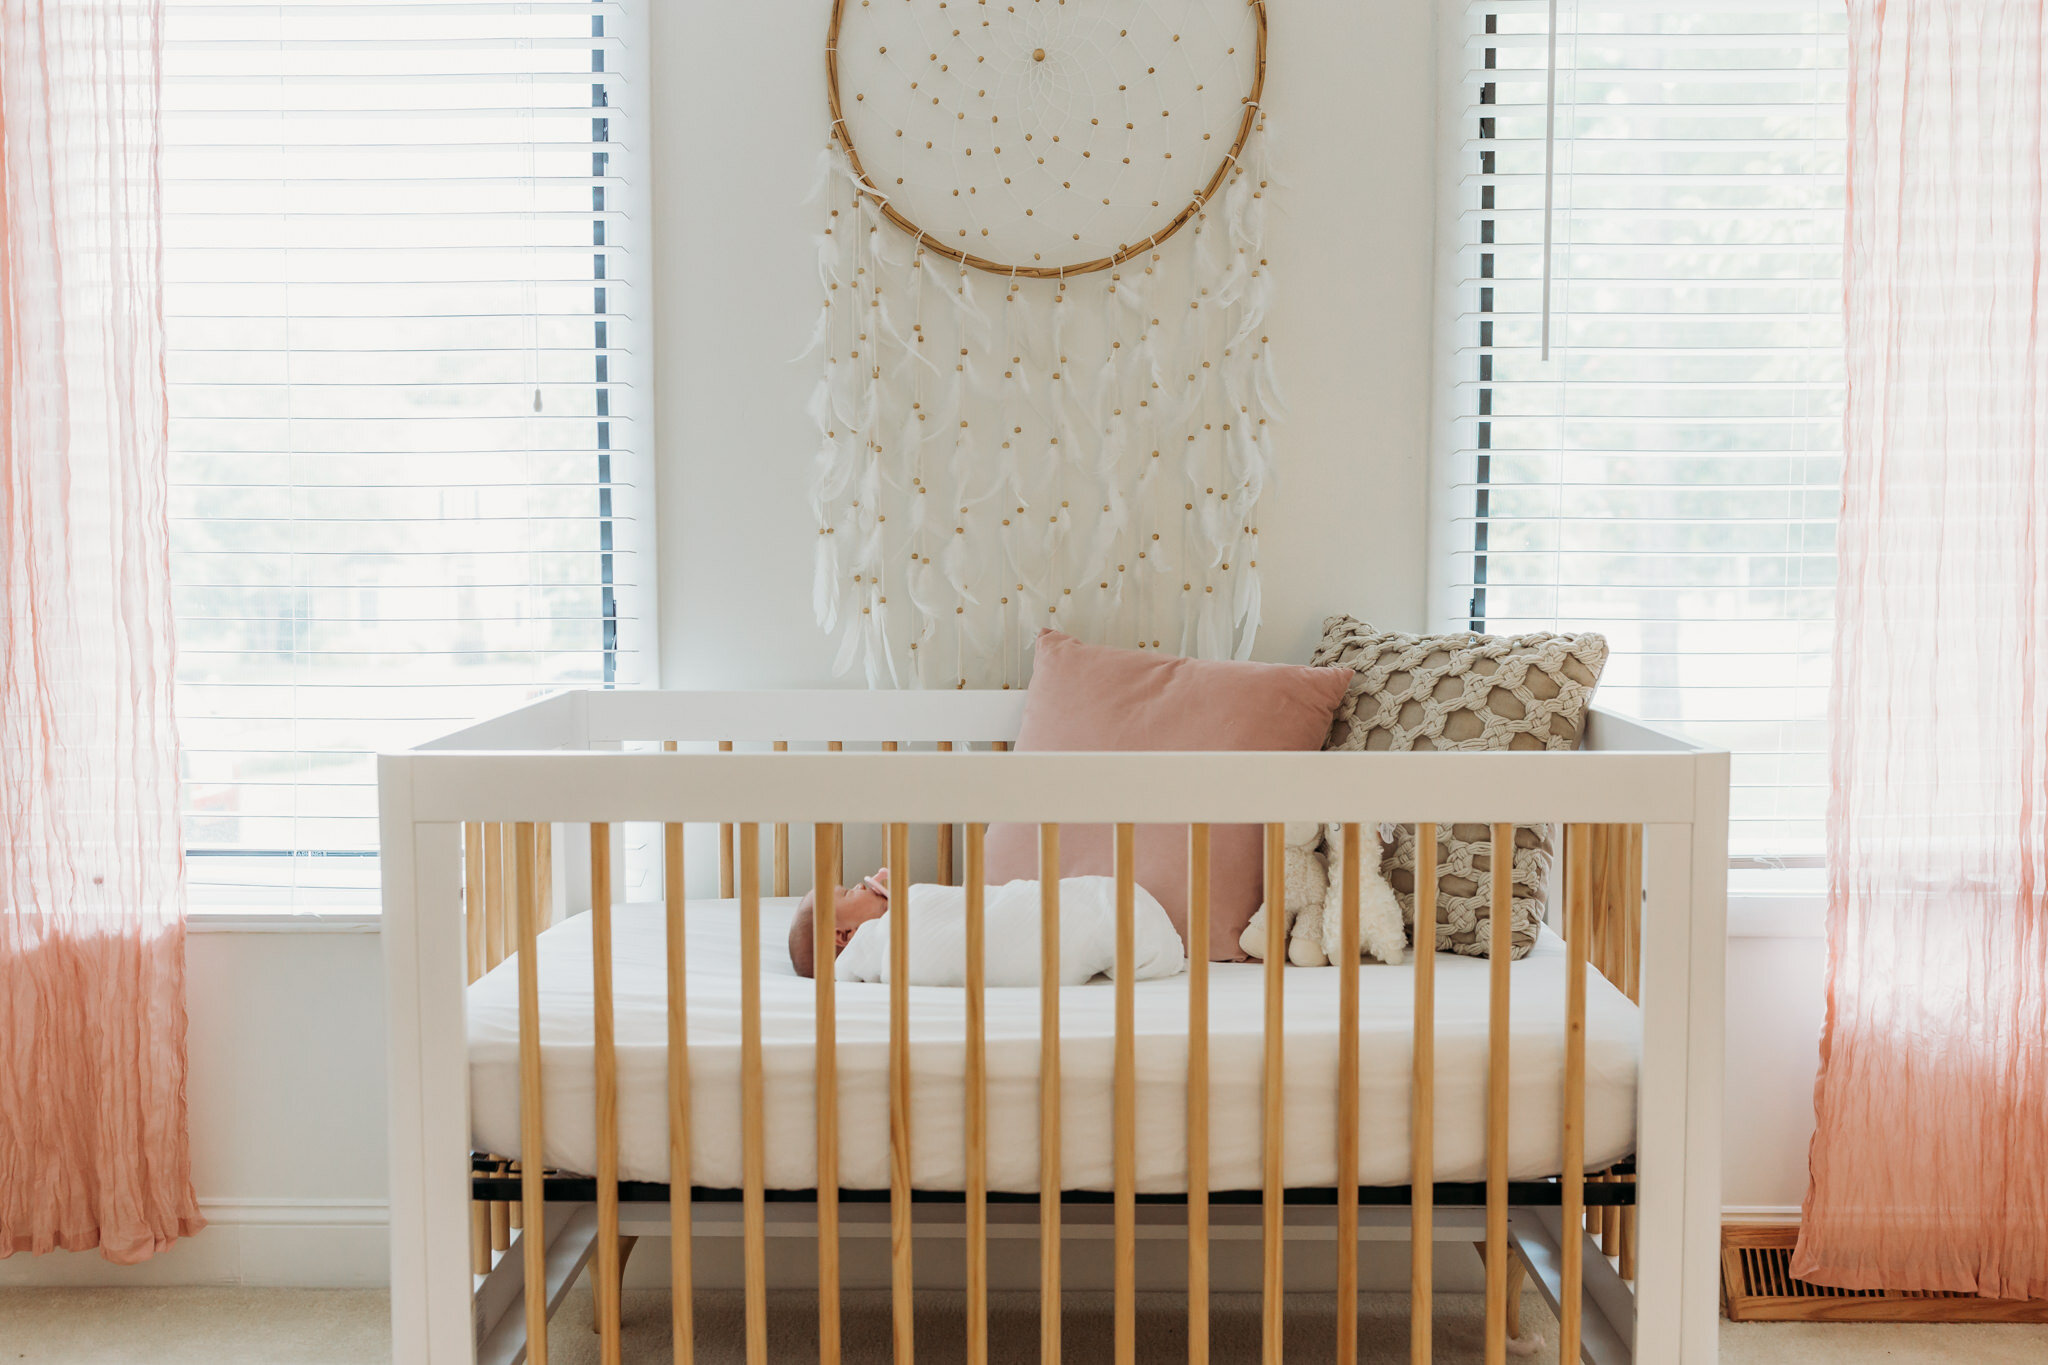 shot of baby laying in crib with dreamcatcher on wall